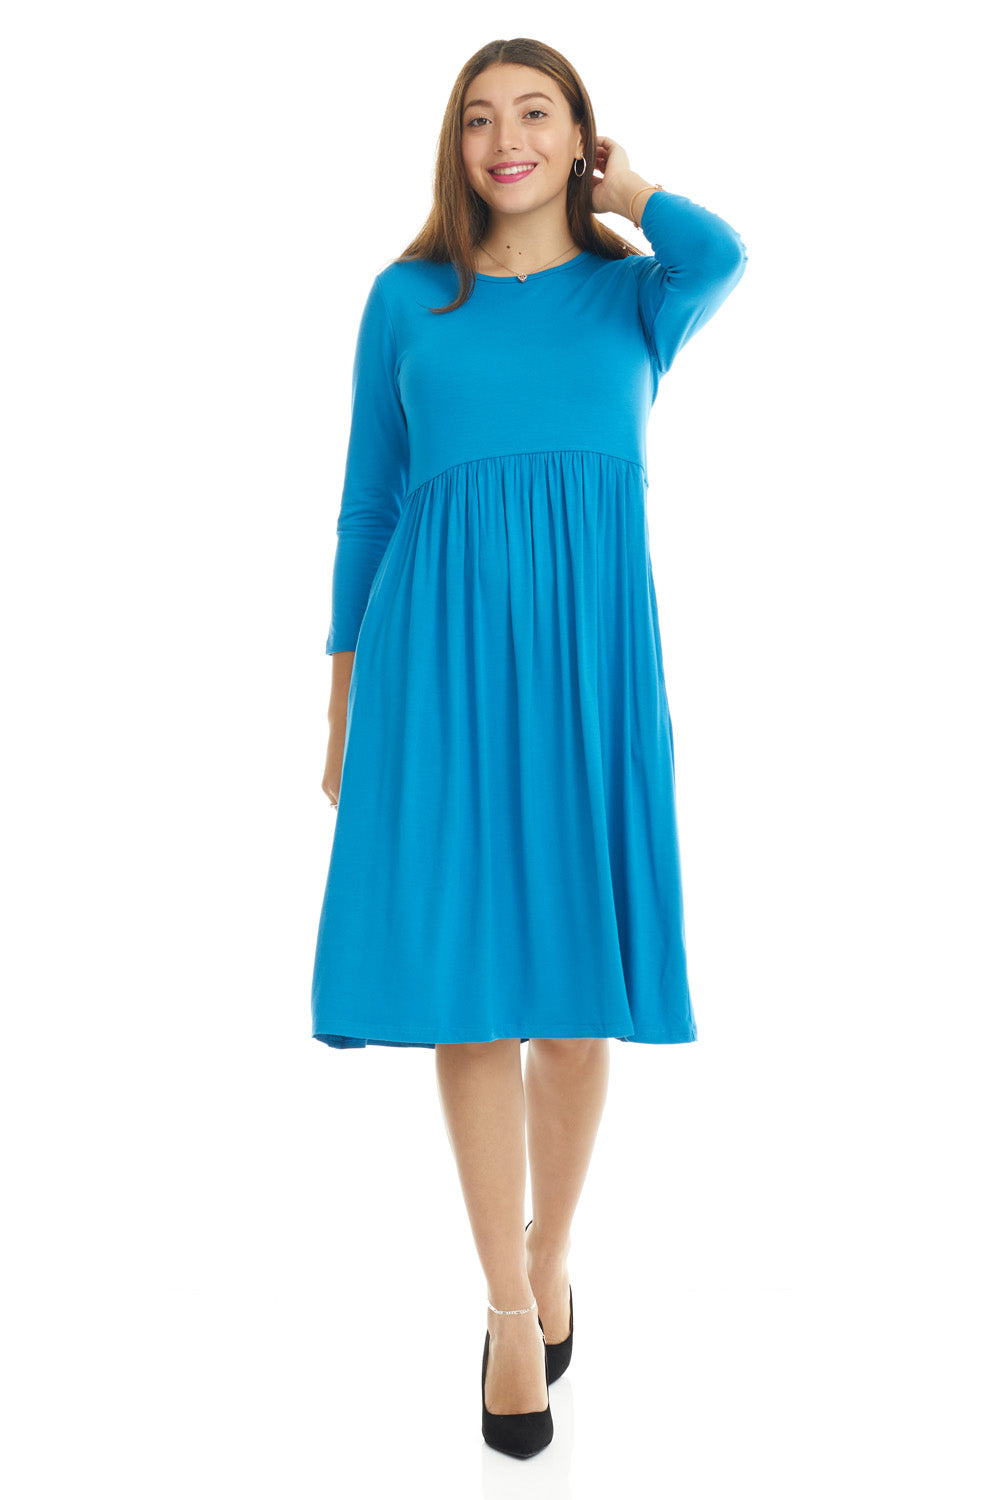 modest 3/4 sleeve babydoll, blue swing dress with pockets